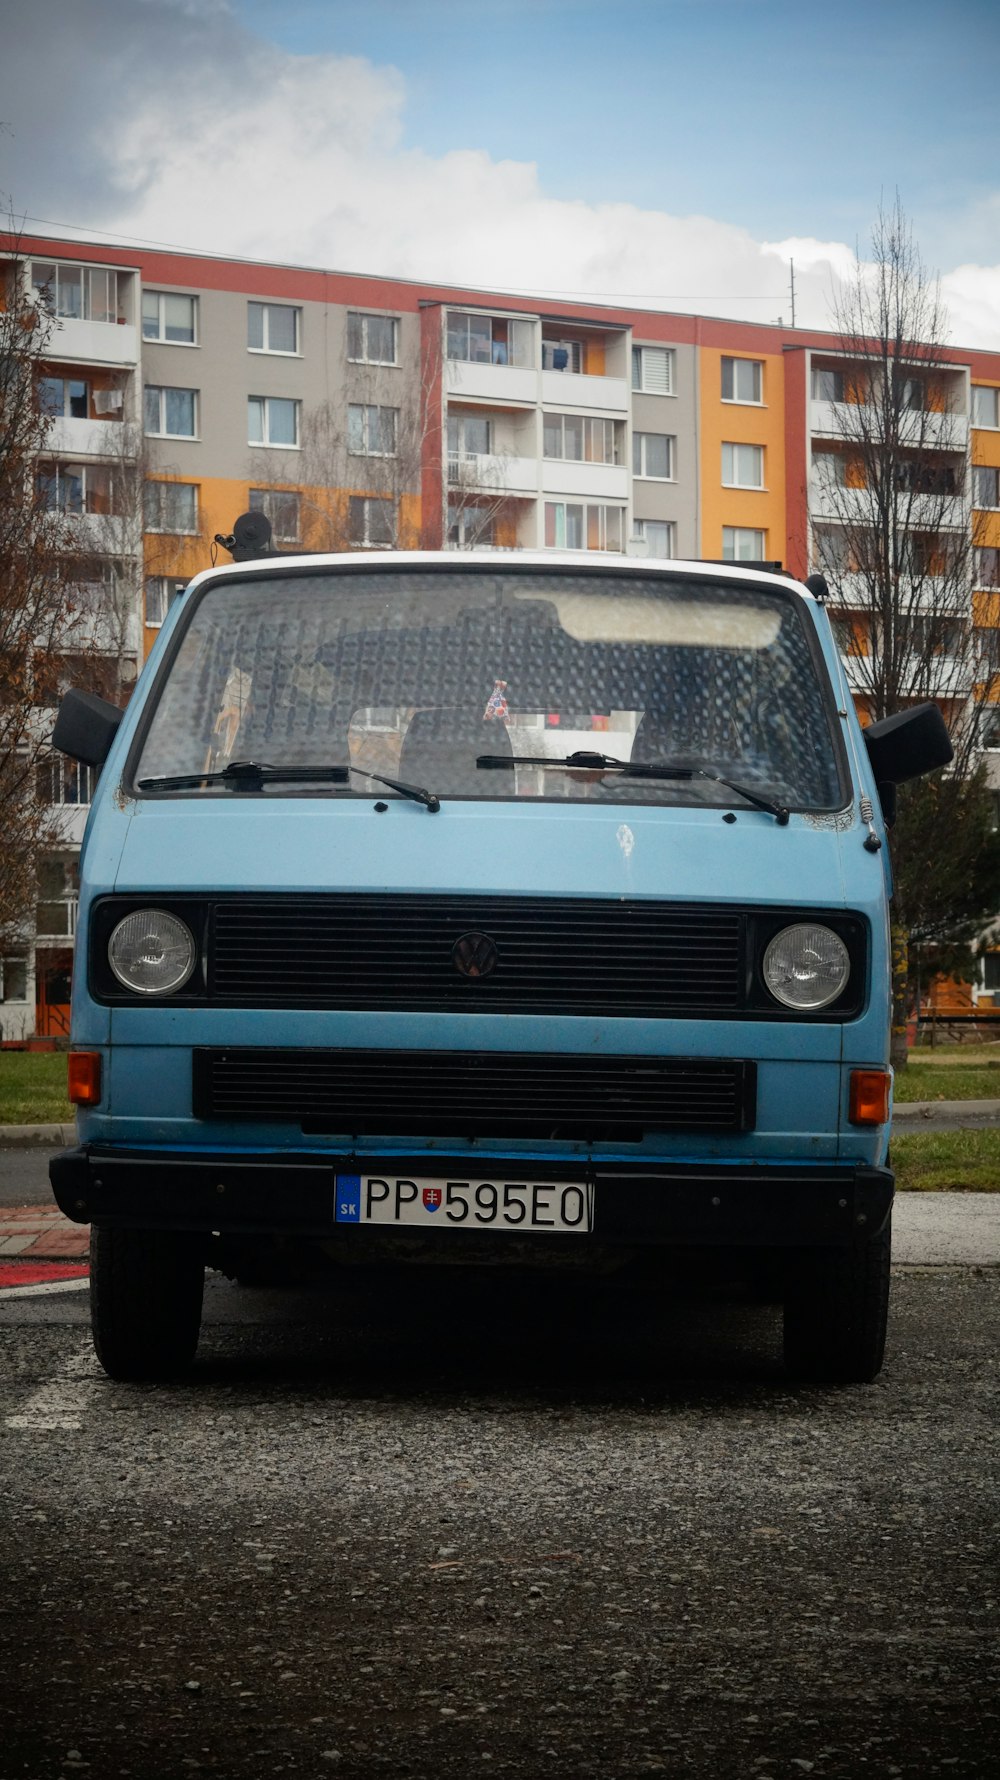 a blue van parked in front of a building